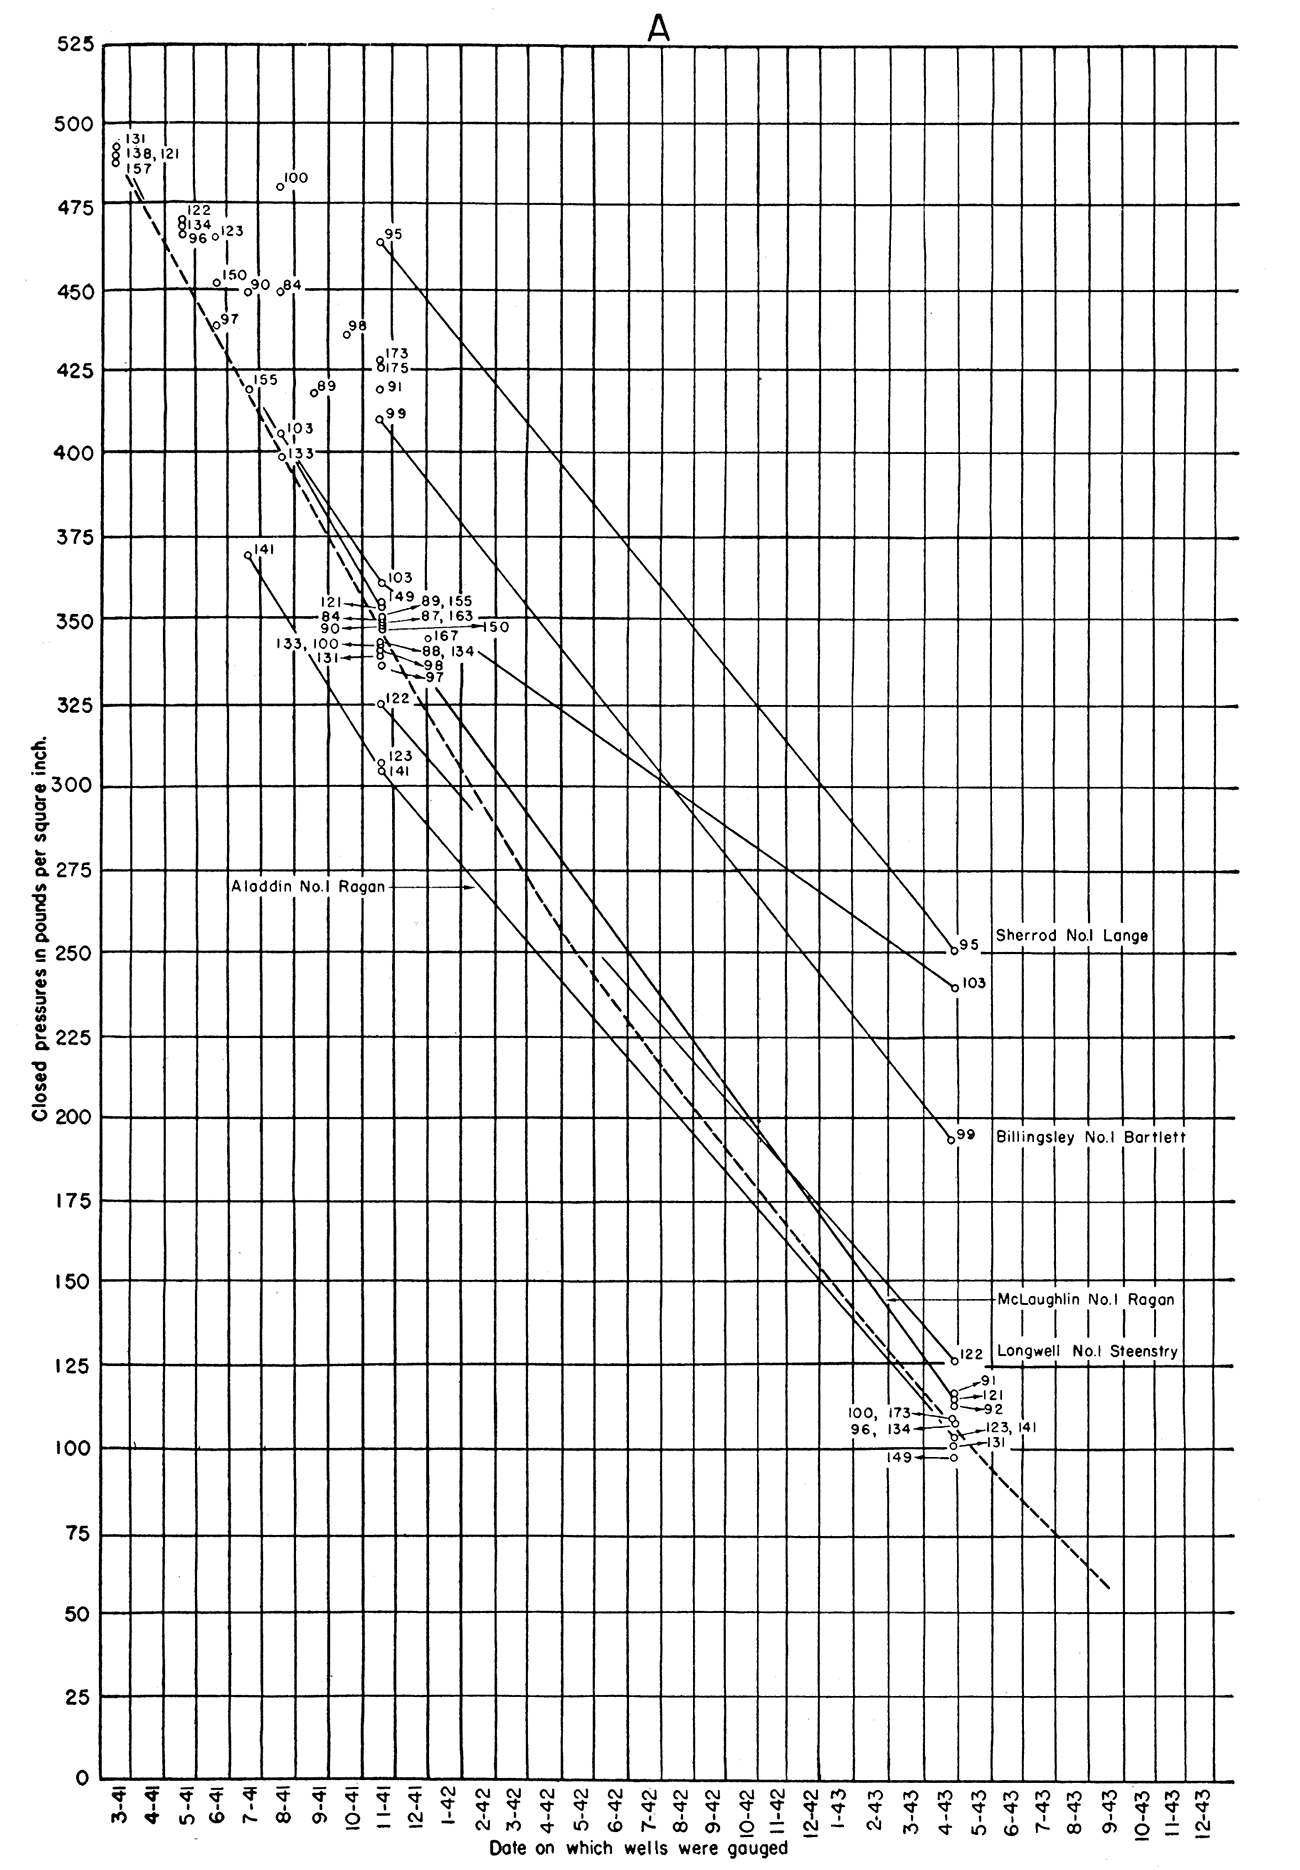 Pressure decline curve of the McLouth gas pool.